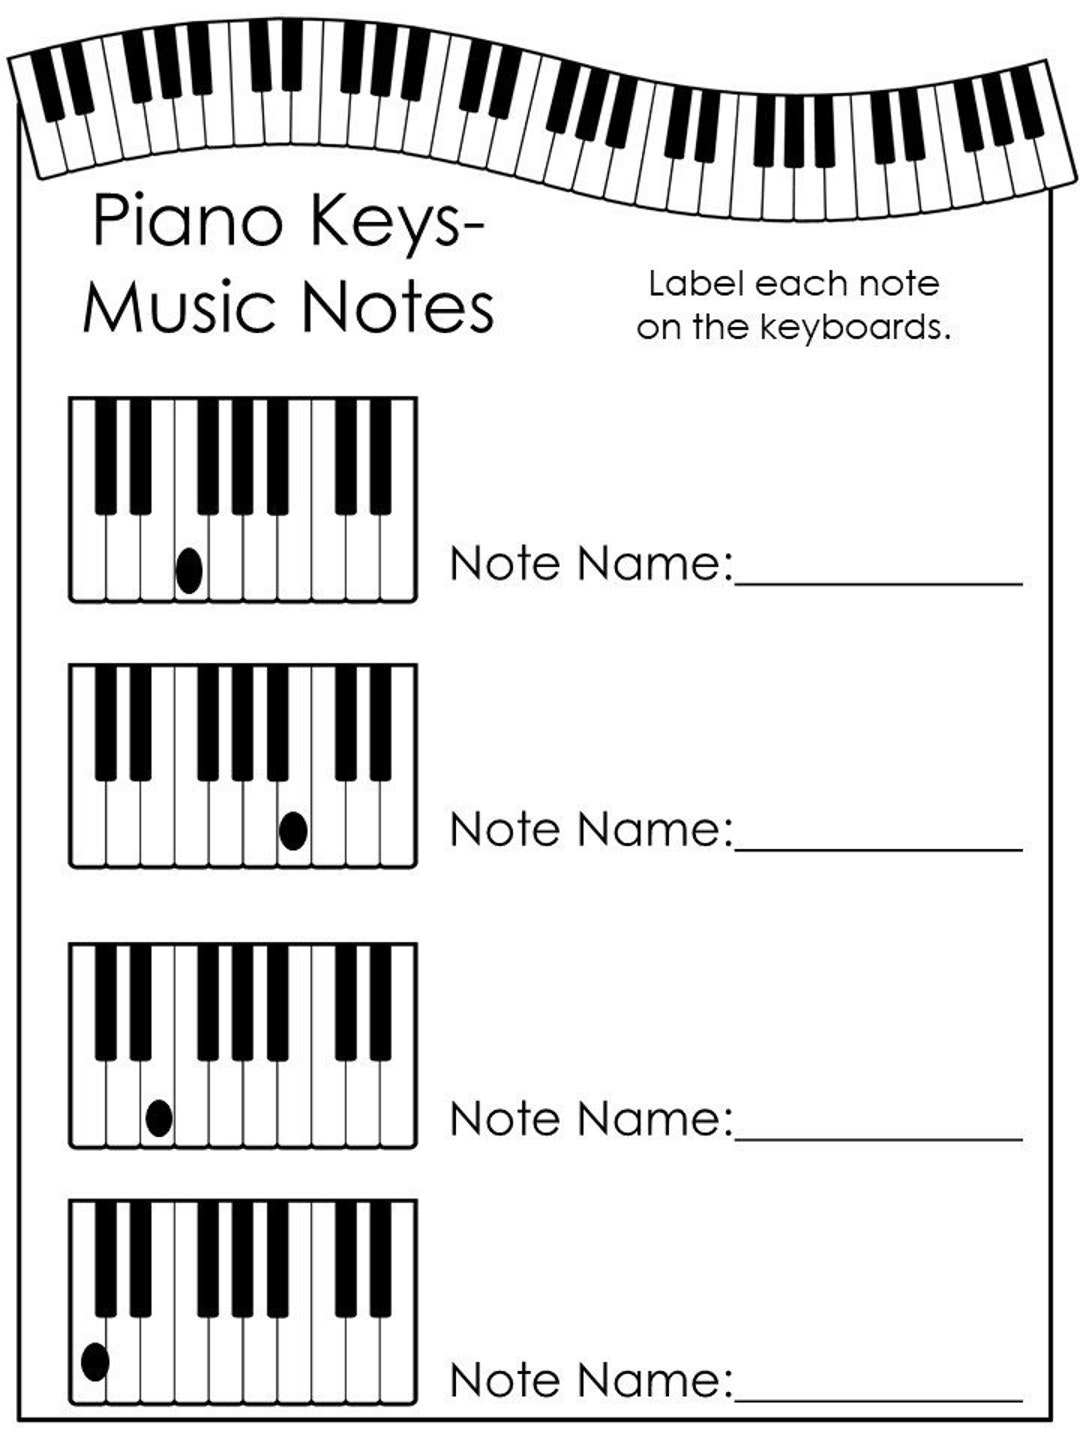 How to Label Piano Keys? [Pictures Included] - EnthuZiastic